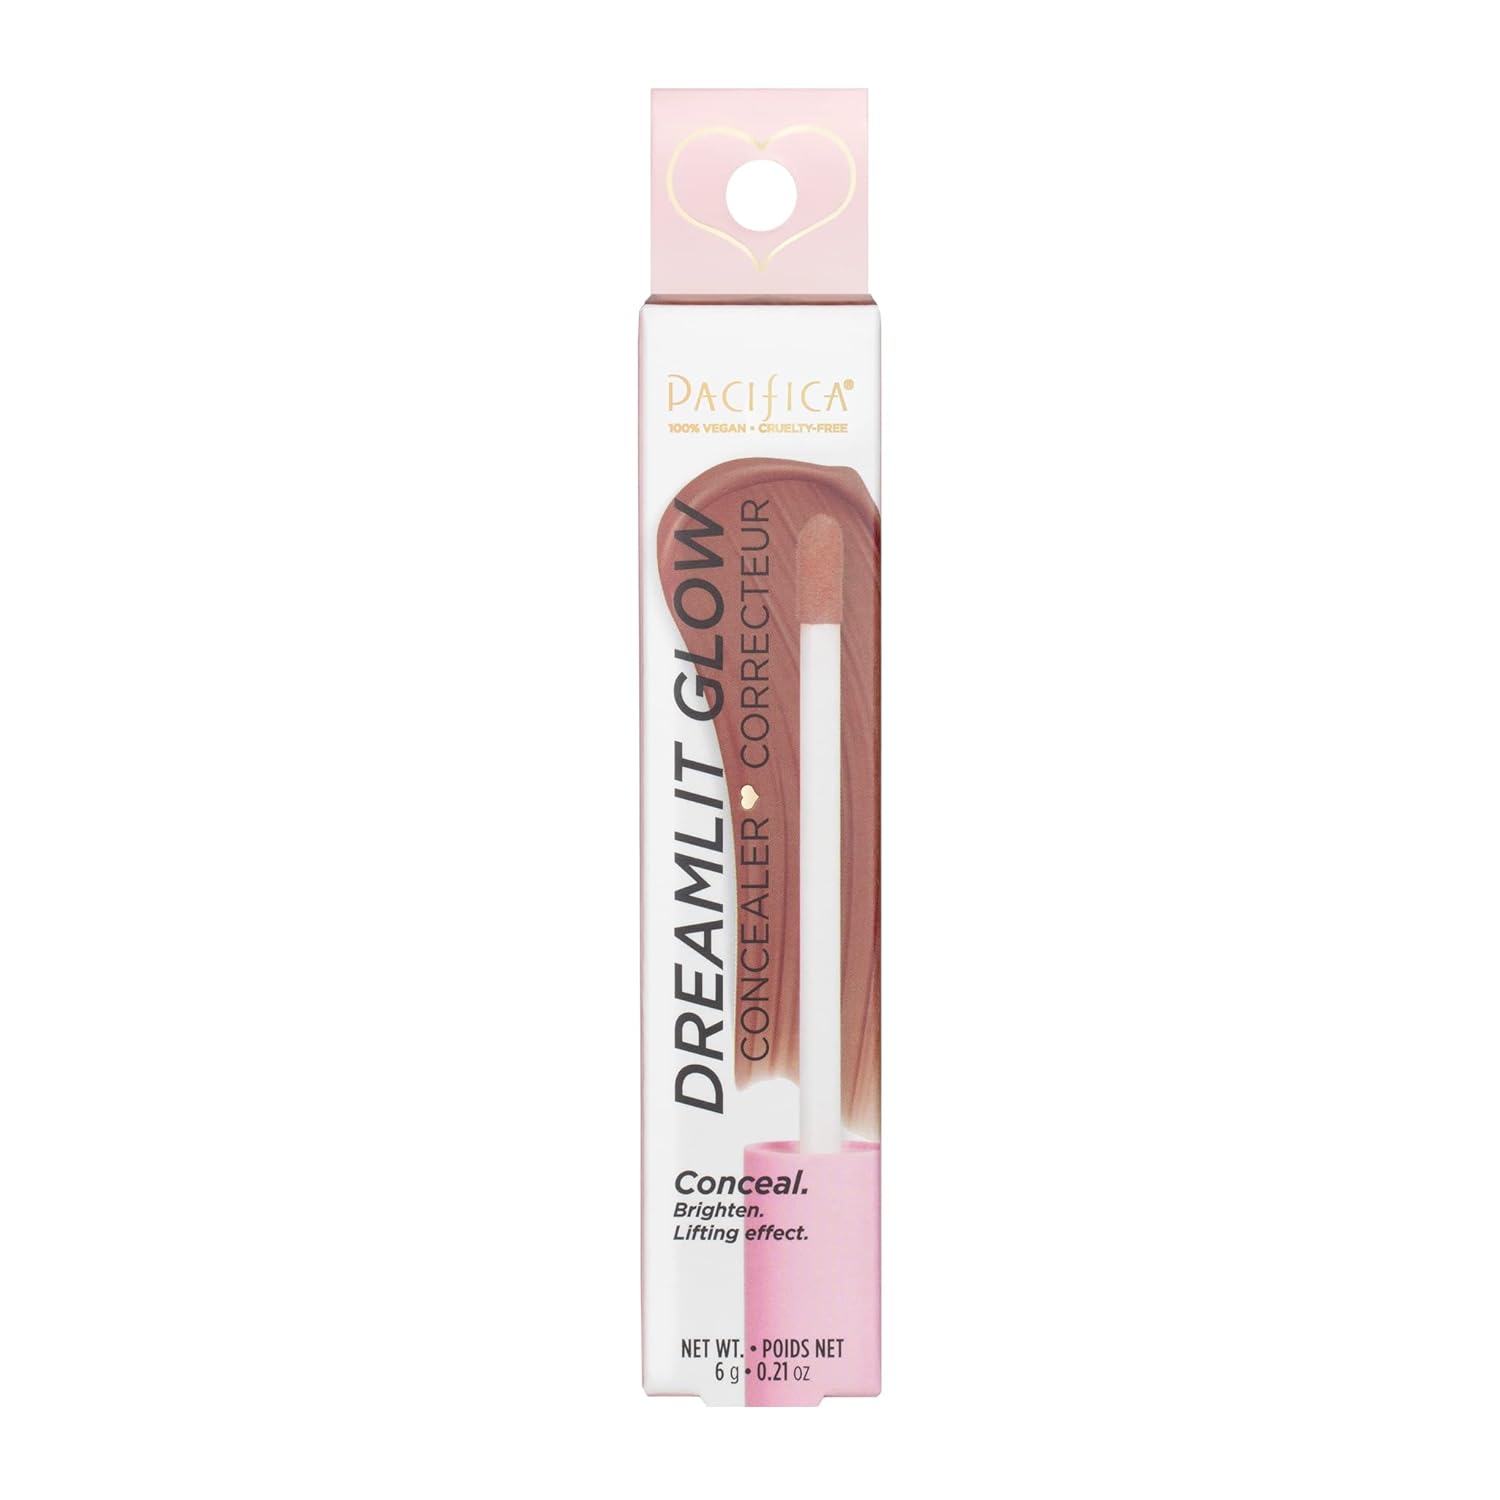 Pacifica Beauty, DreamLit Glow Concealer -Shade 03, Multi-Use Concealer, Conceals, Corrects, Covers, Puffy Eyes and Dark Circles Treatment, Plant-Based Formula, Lightweight, Long Lasting, Vegan : Beauty & Personal Care